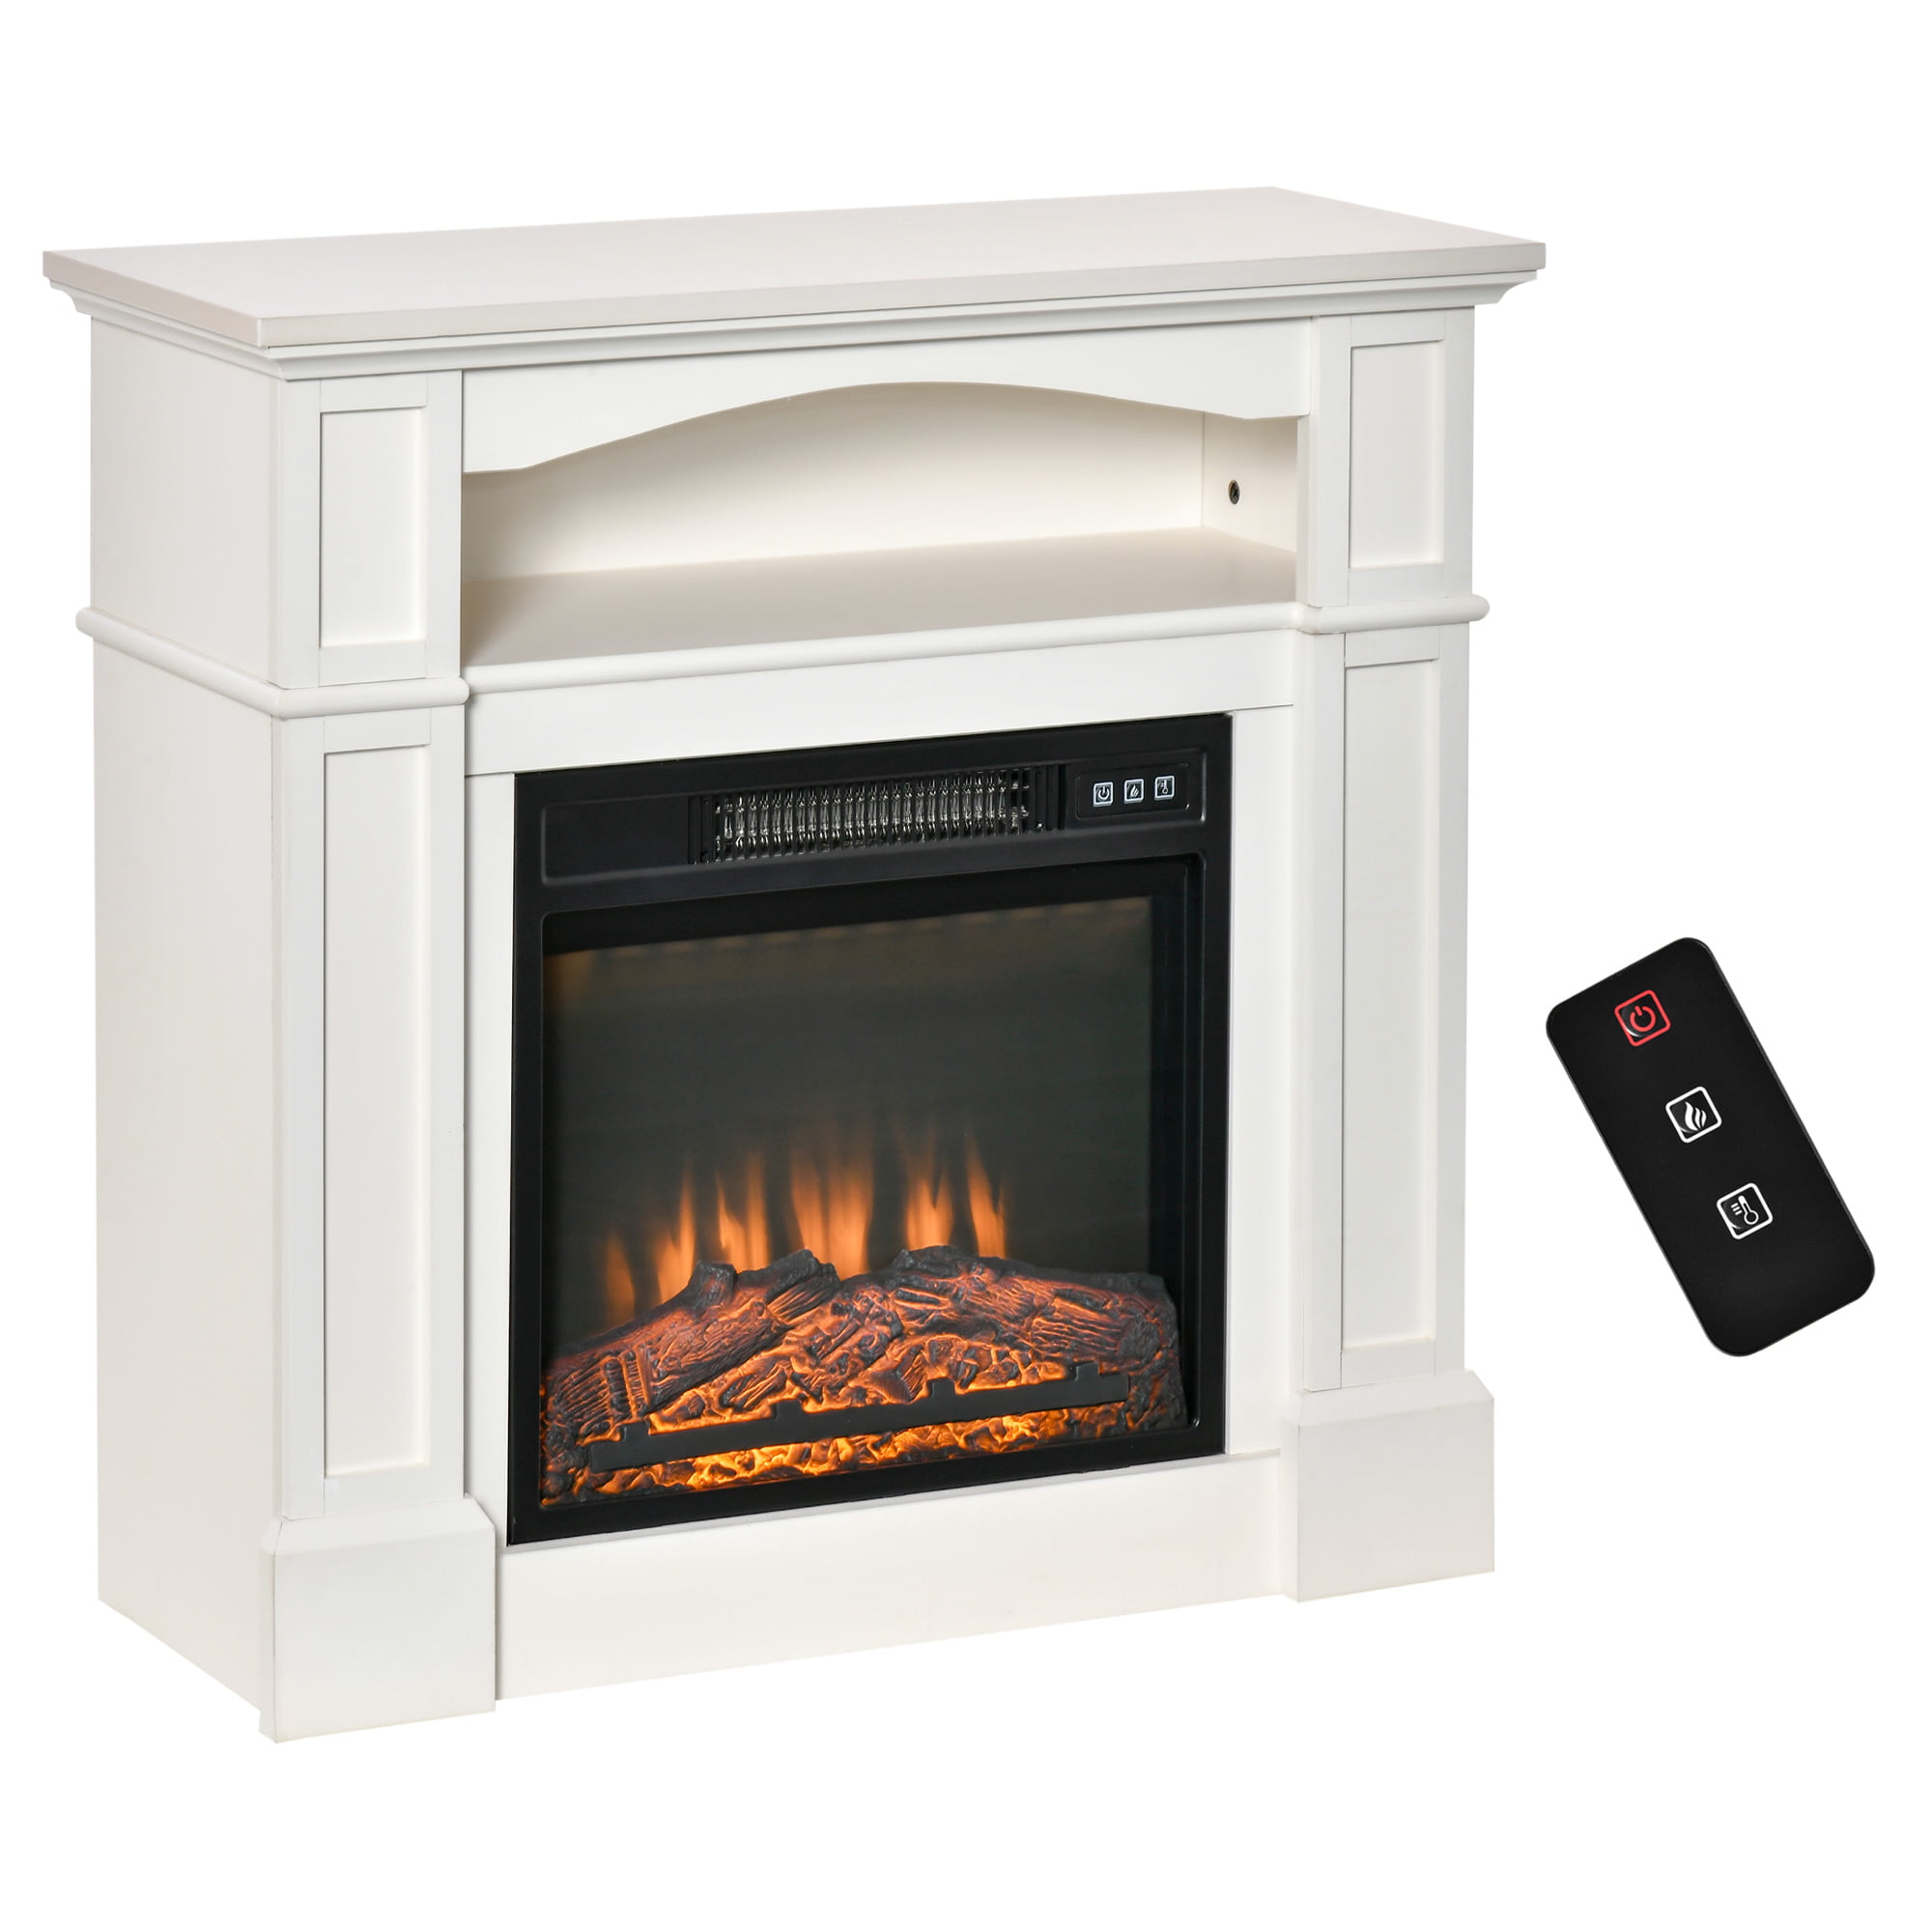 HomCom Electric Fireplace with Mantel, Freestanding Heater Corner Firebox with Log Hearth, Shelf and Remote Control, 1400W, White